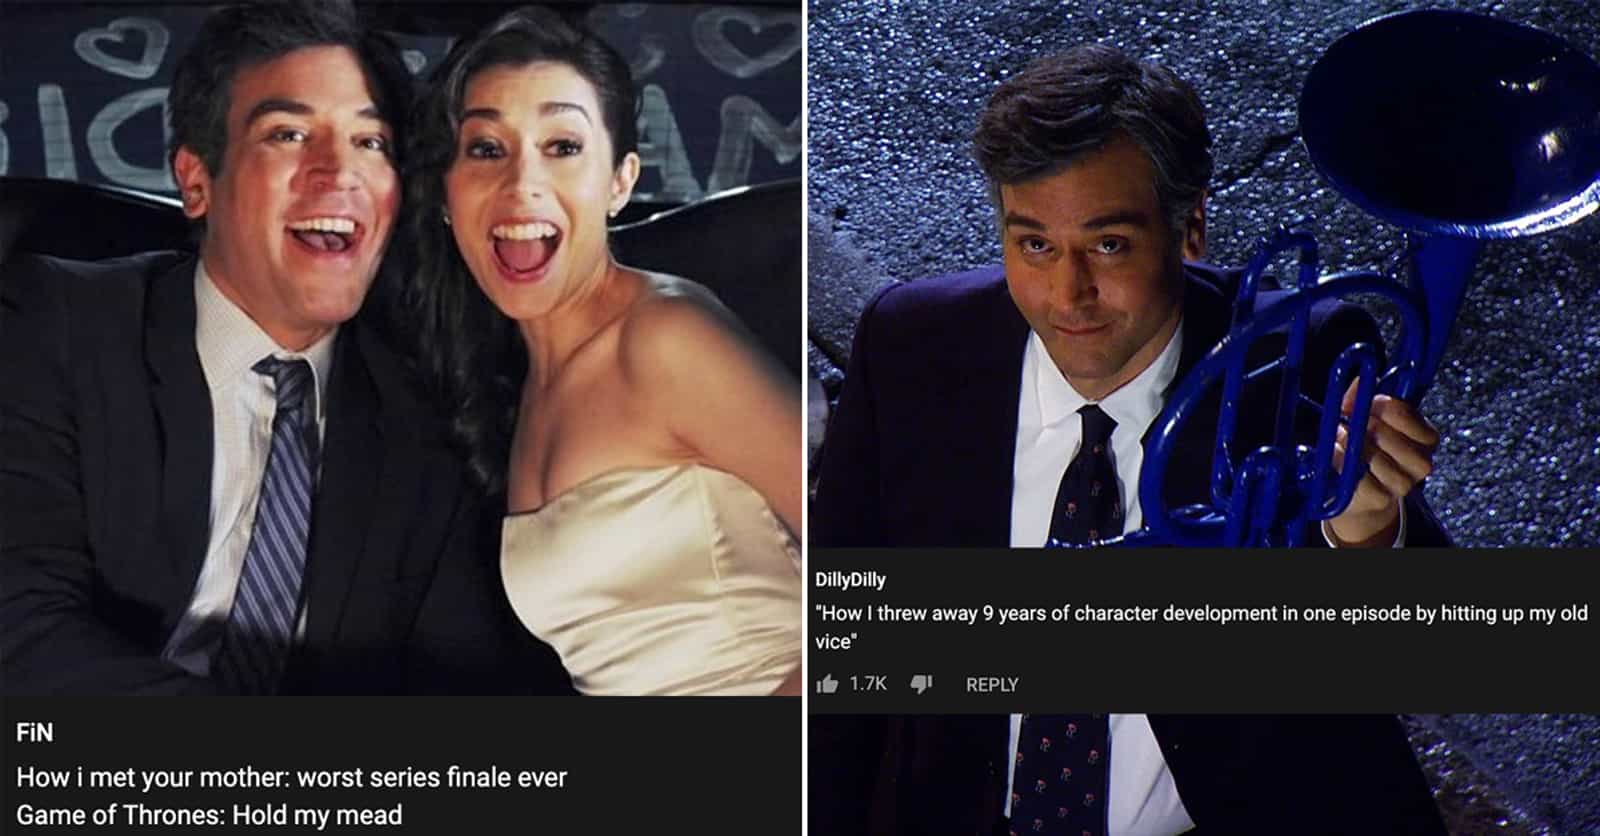 15 Reactions To The 'How I Met Your Mother' Finale That Prove People Still Have Strong Feelings